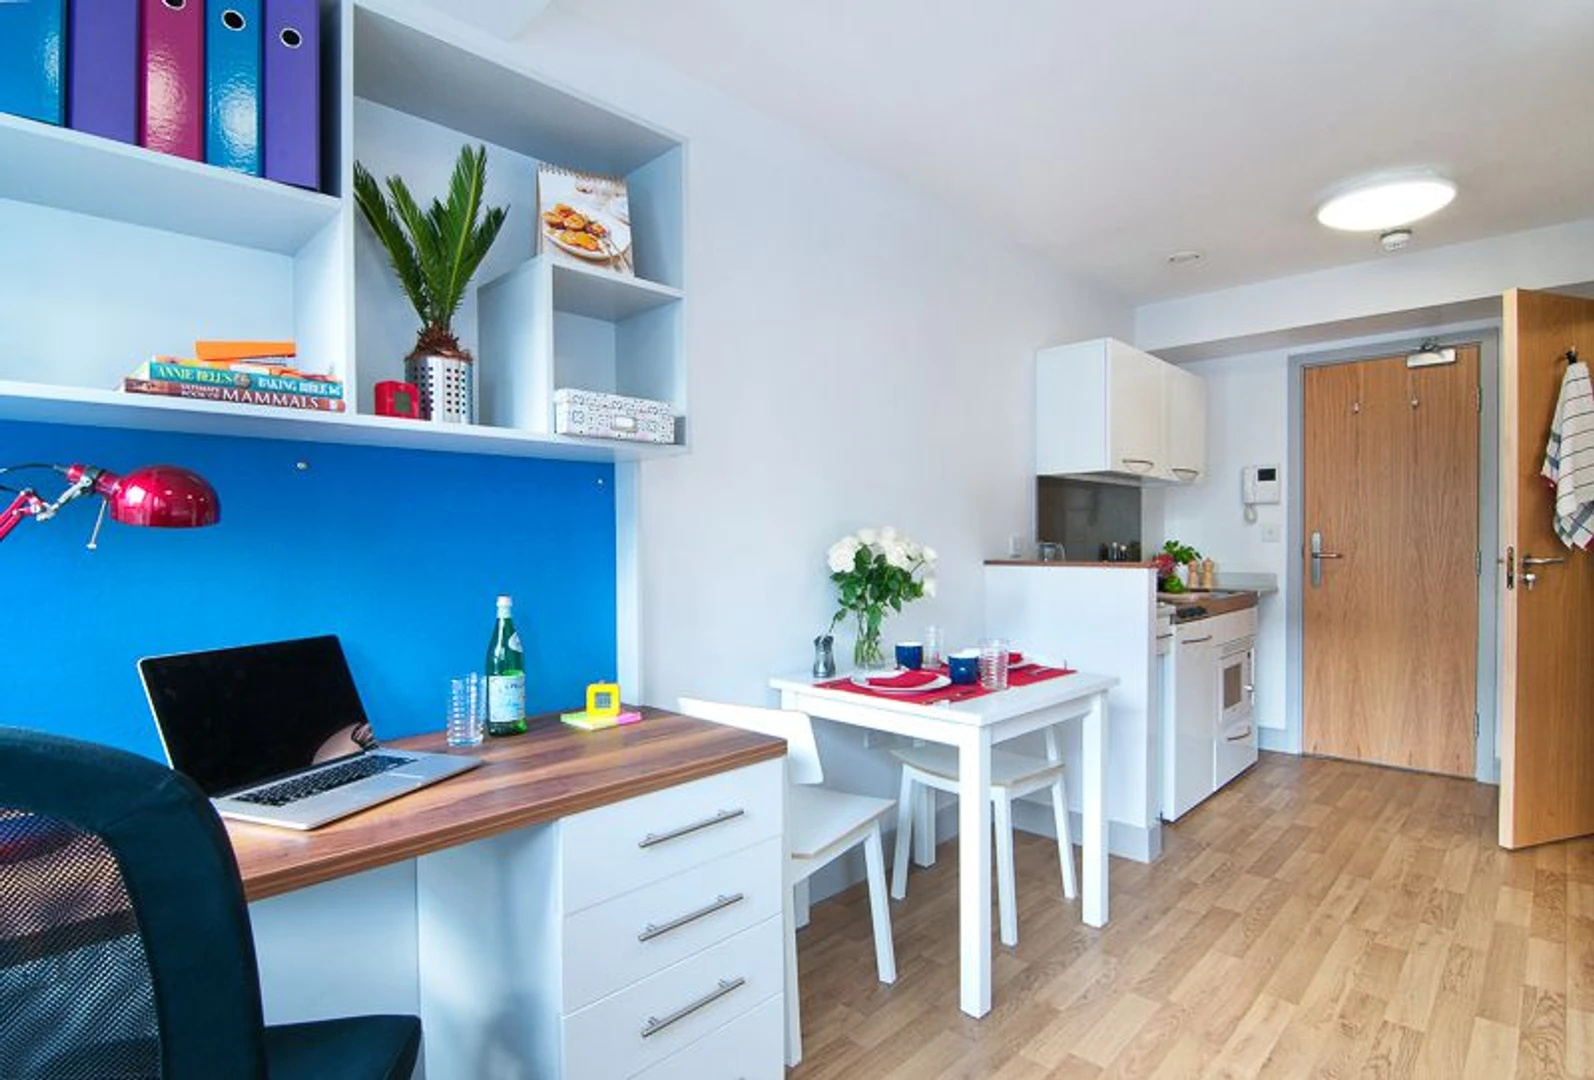 Renting rooms by the month in Southampton